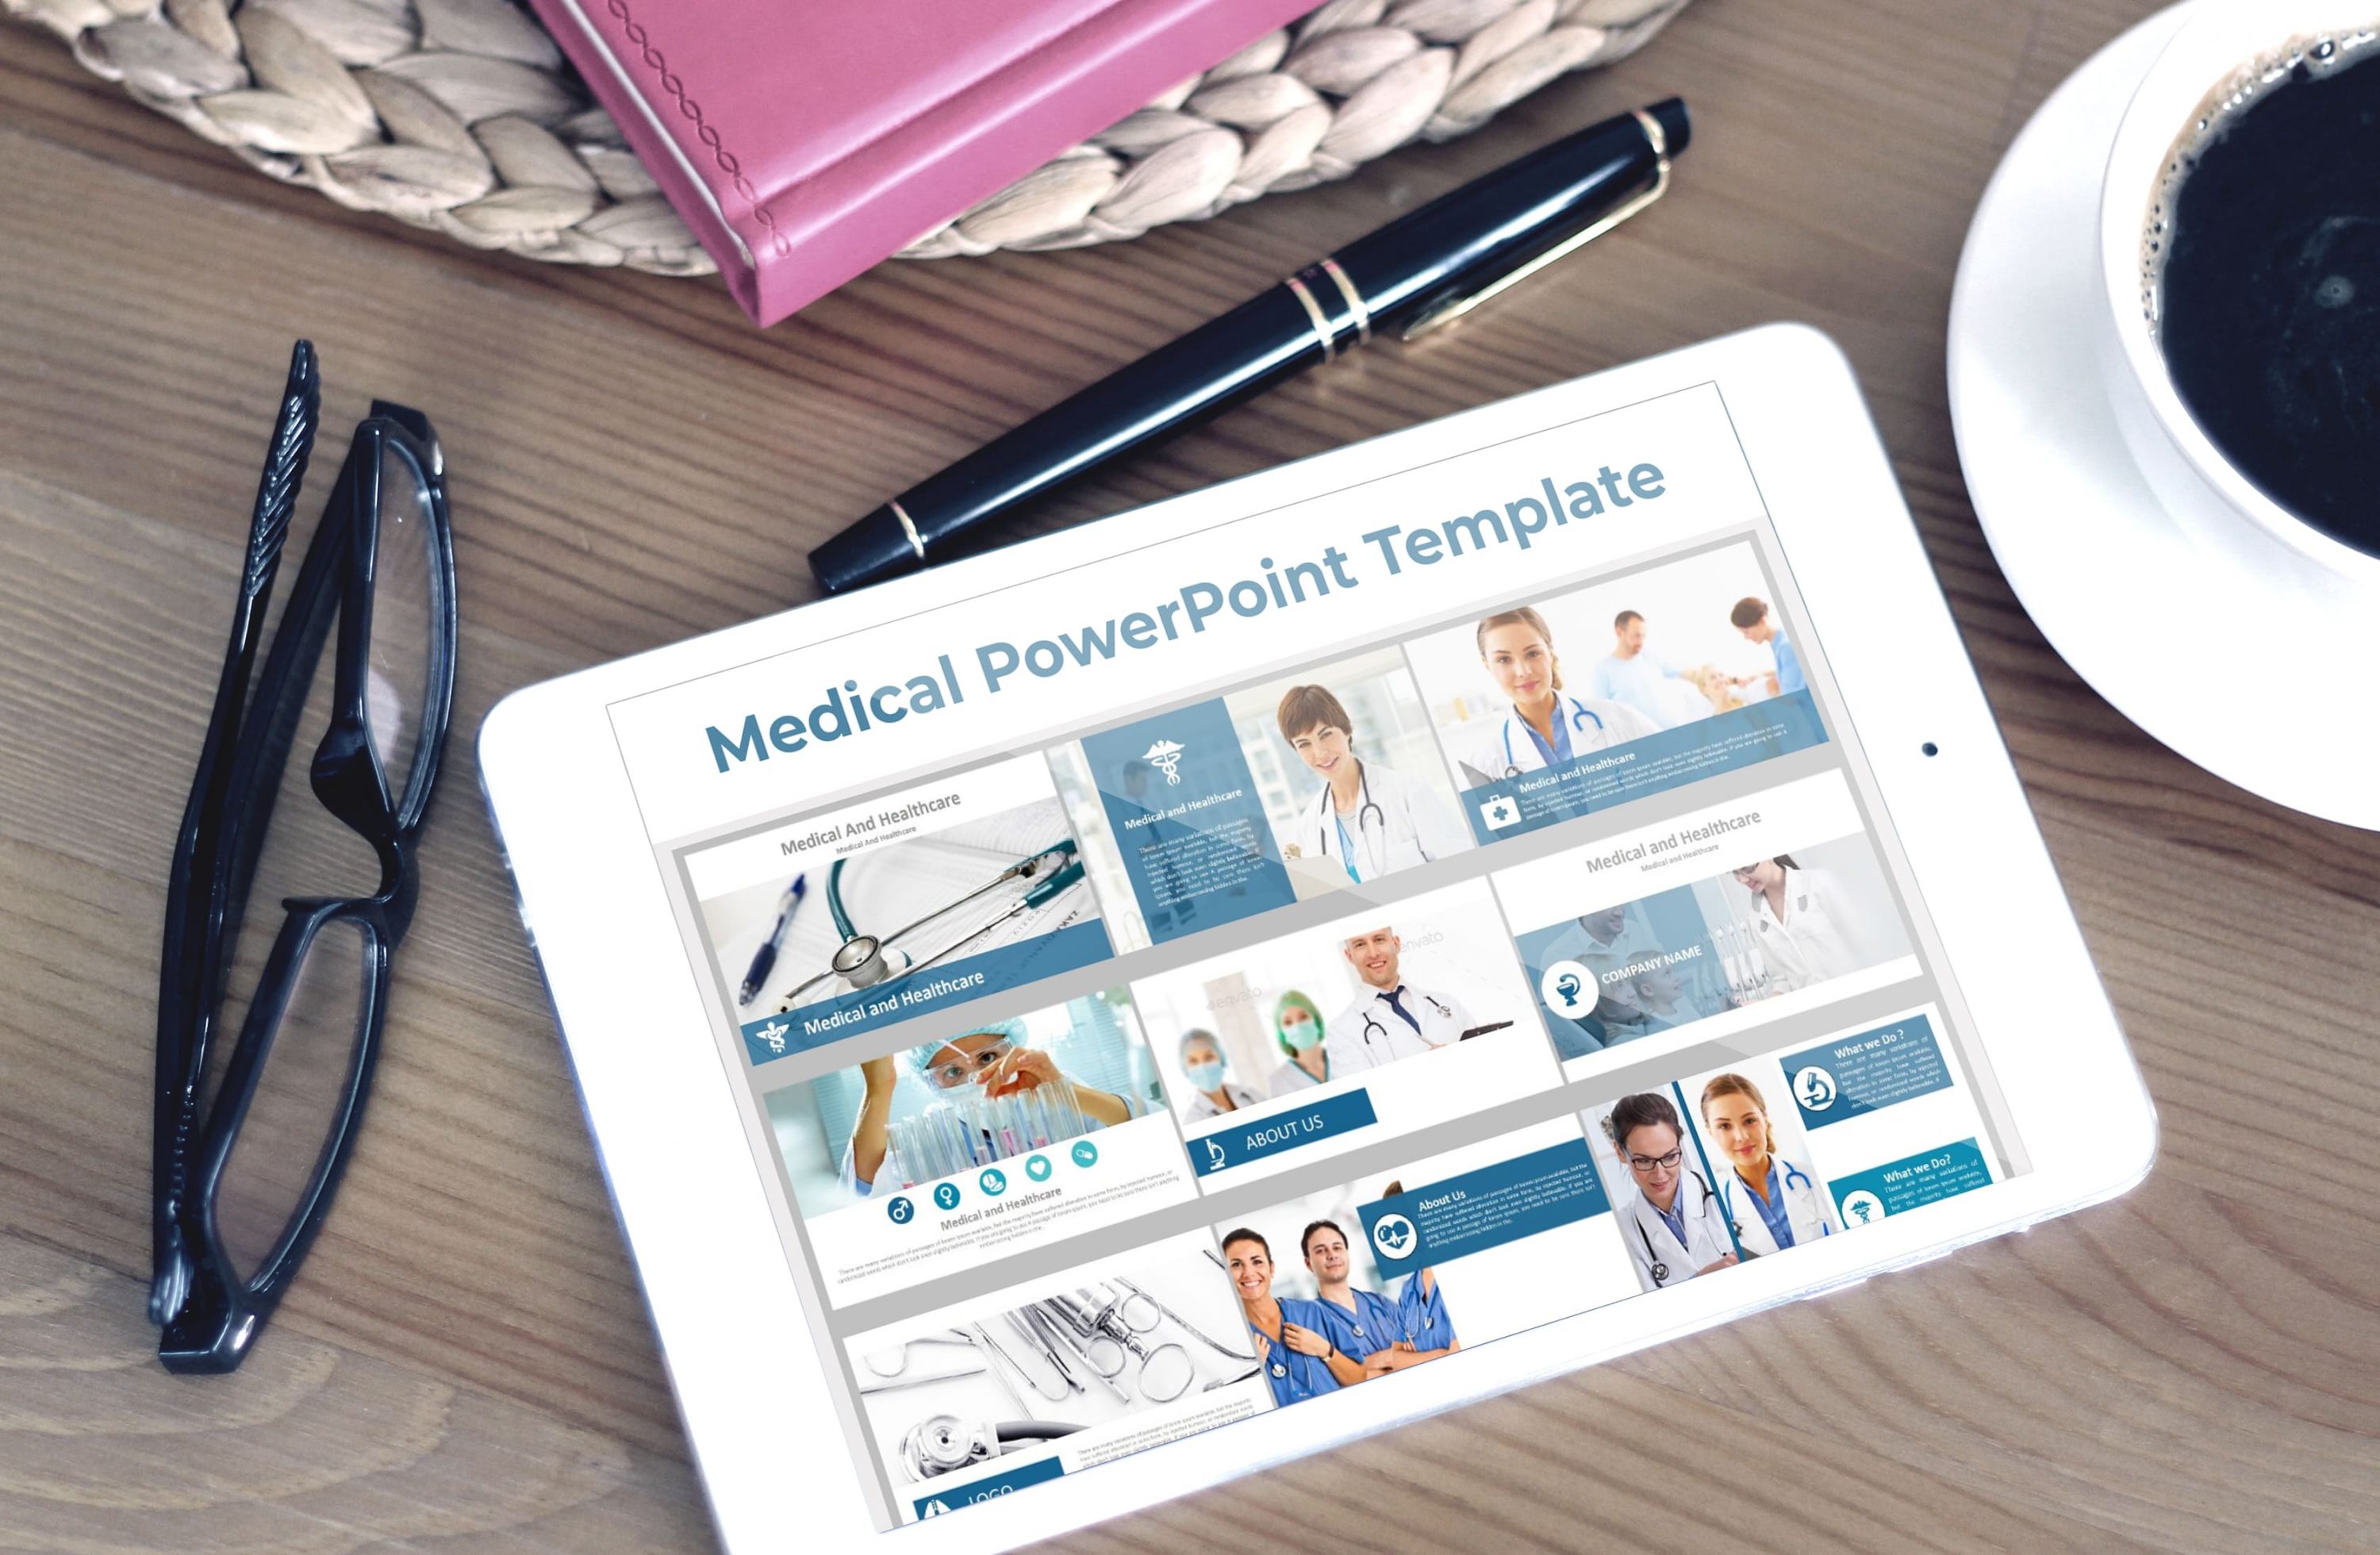 Tablet option of the Medical PowerPoint Template.